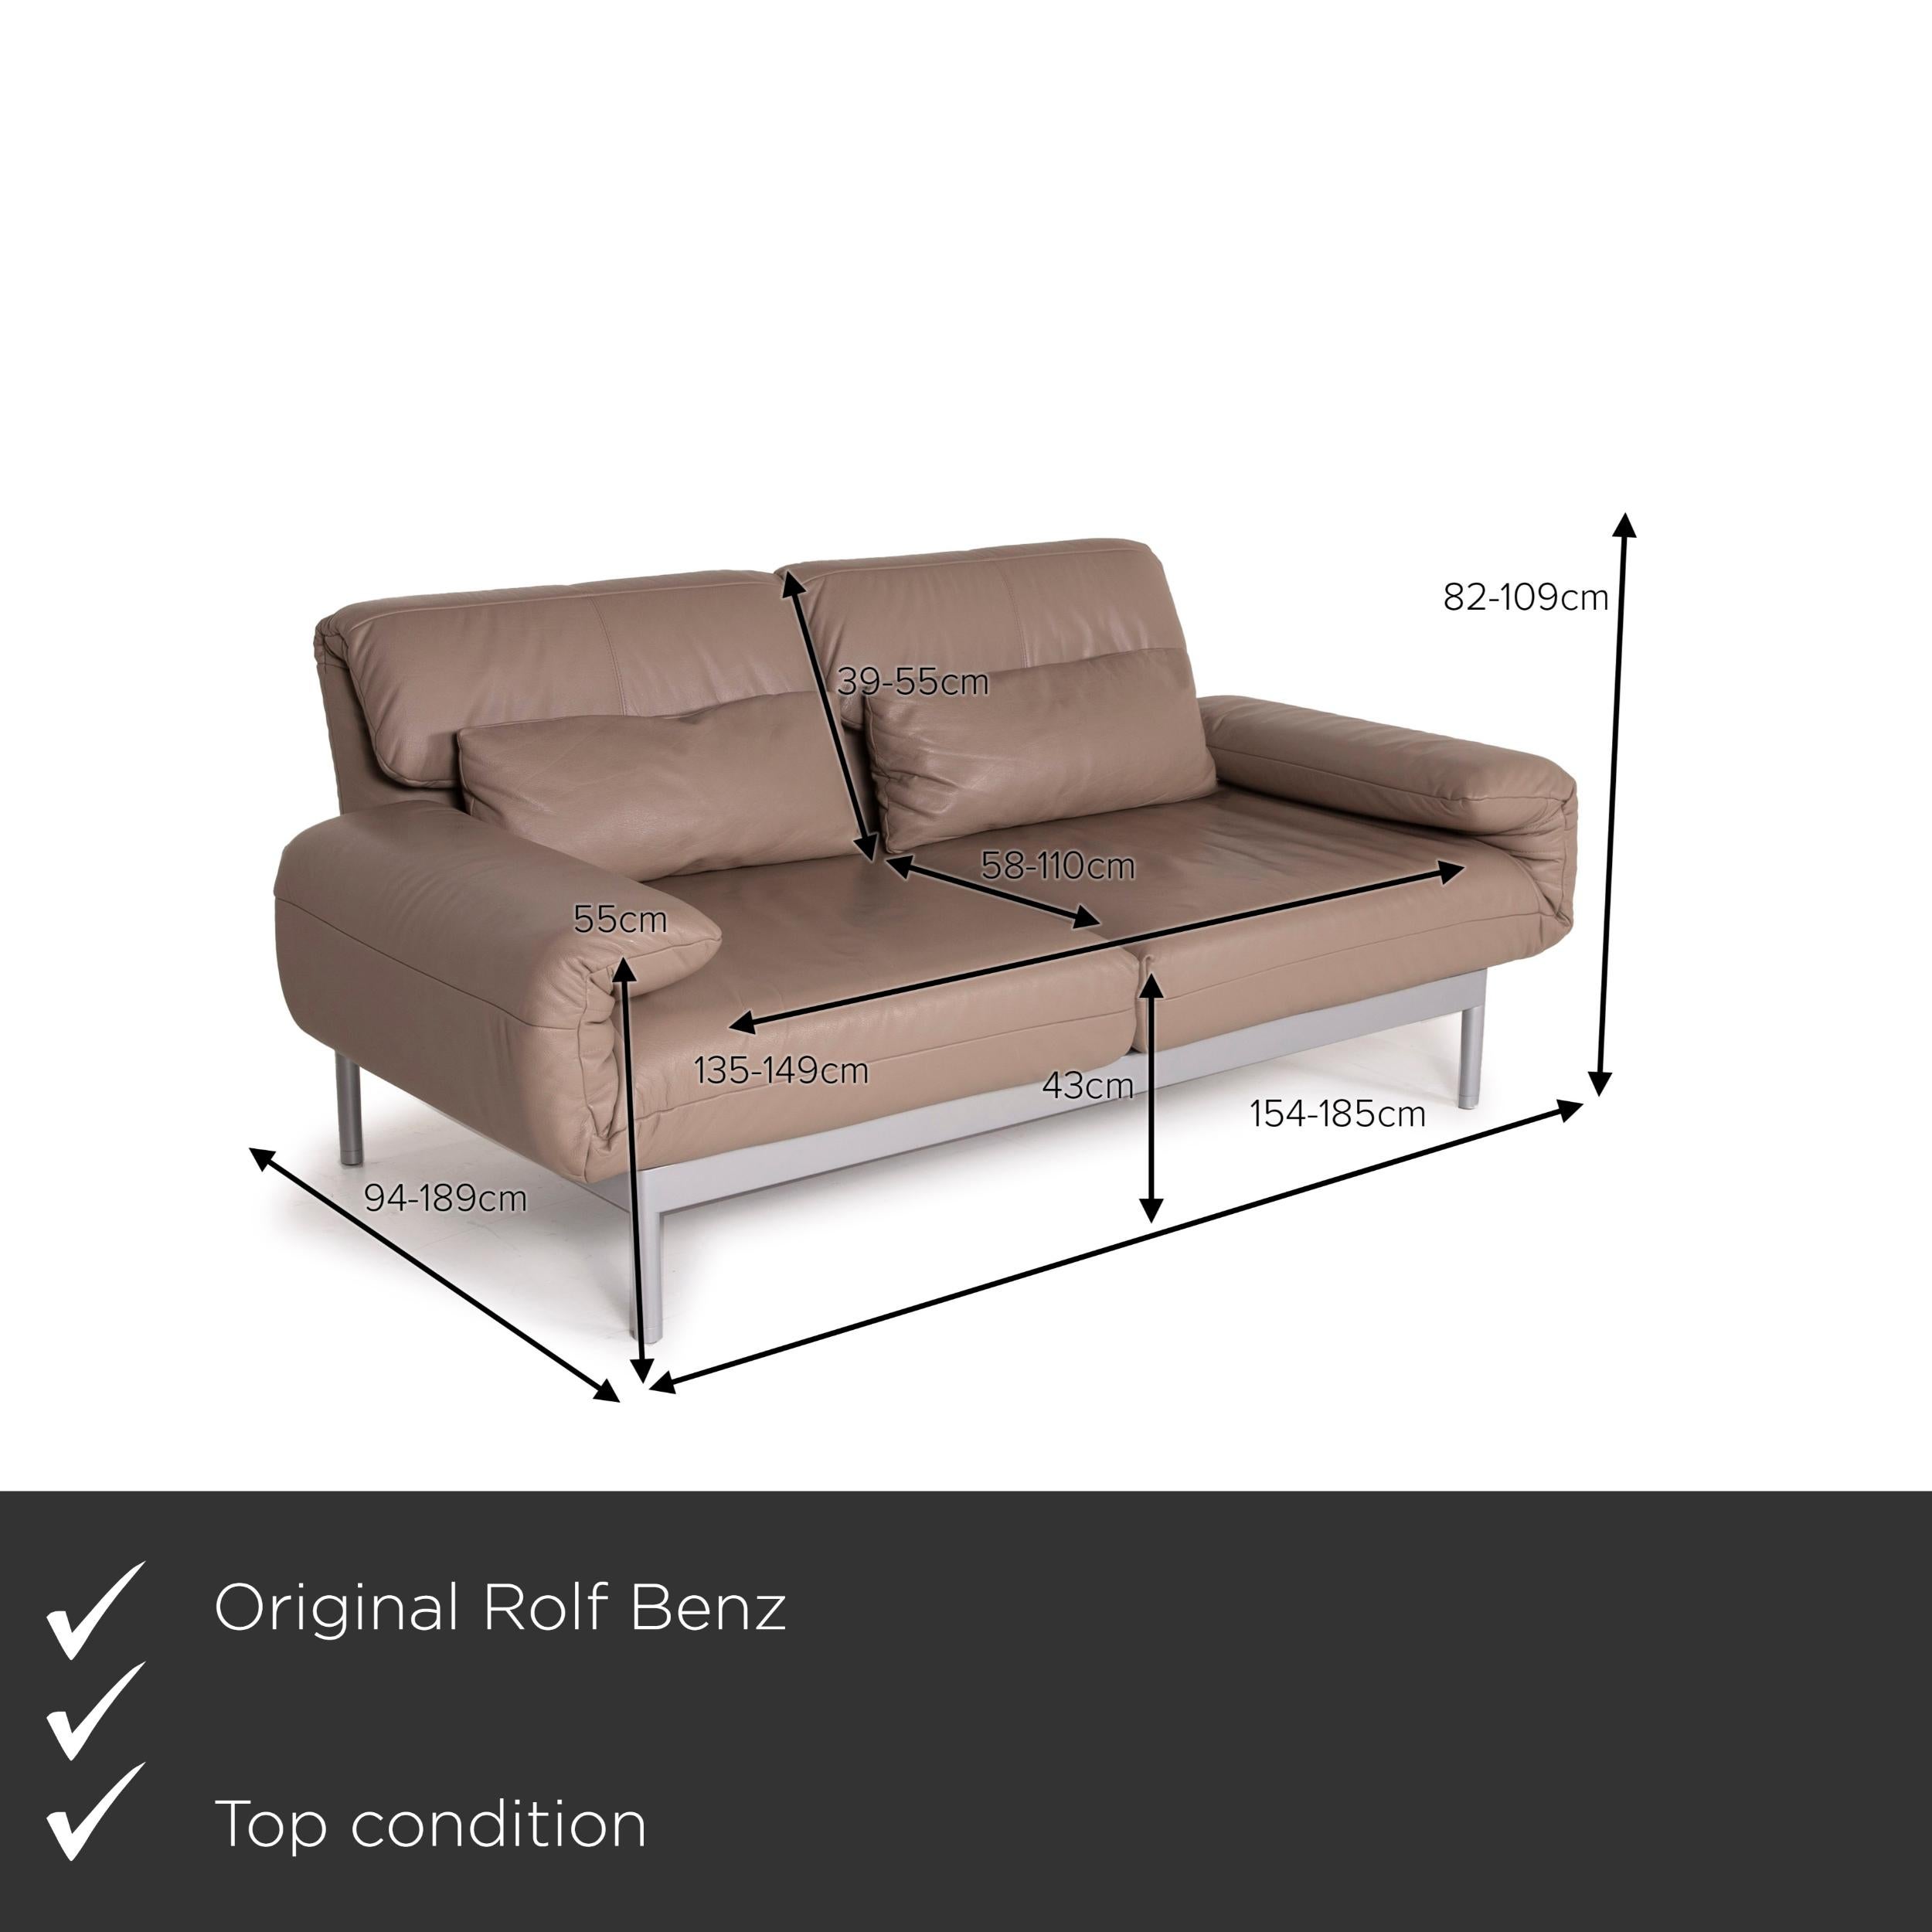 We present to you a Rolf Benz Plura leather sofa brown two-seater function reclining function.


 Product measurements in centimeters:
 

Depth: 94
Width: 154
Height: 82
Seat height: 43
Rest height: 55
Seat depth: 58
Seat width: